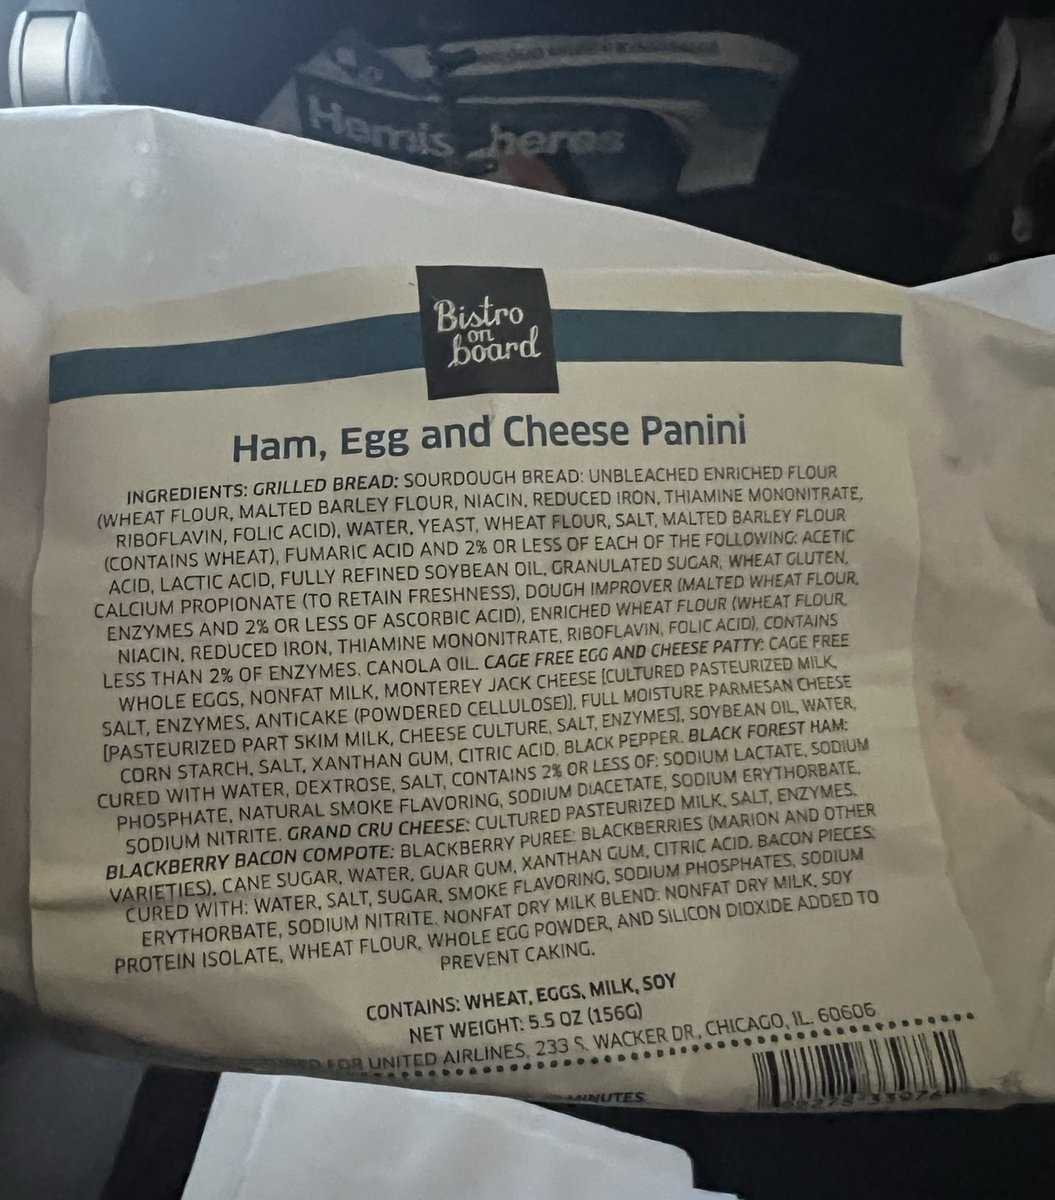 Friendly reminder that American food is poison and you should be reading the ingredients I ordered this sandwich on a plane Ham (pork) Egg (egg) Cheese (salt milk enzymes) Bread (flour water yeast salt) So wtf is the rest of this shit?